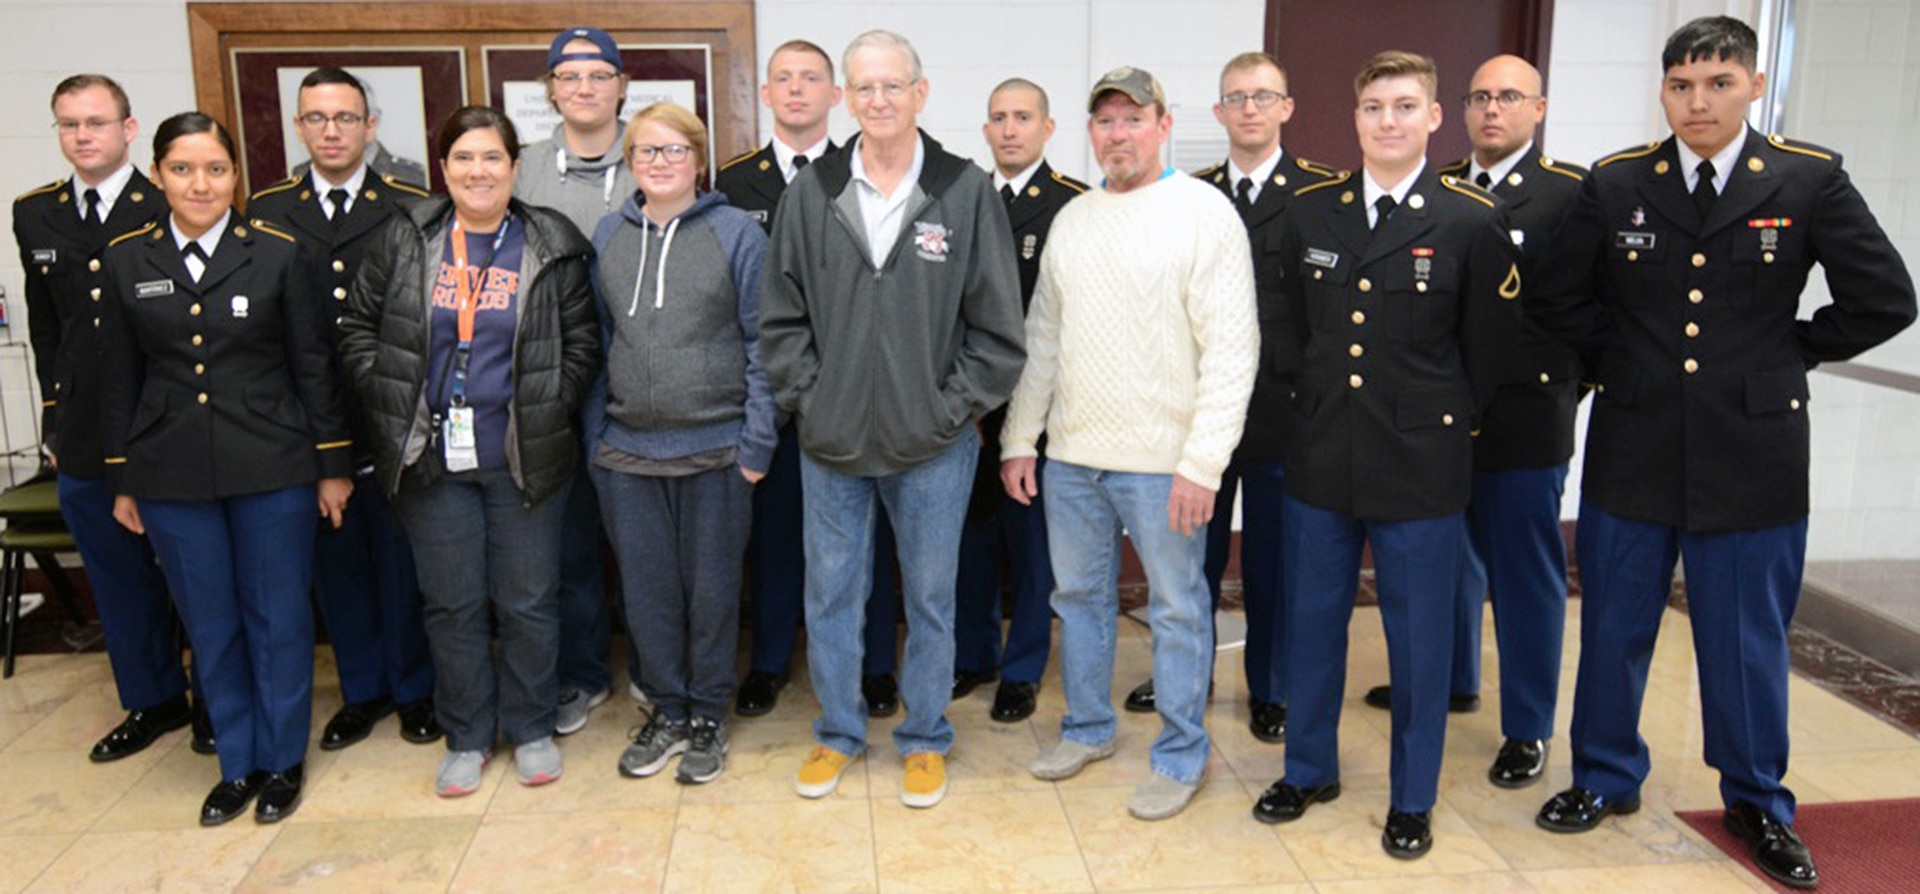 Dennis Reilly (center) with his family and nine Soldiers. This marks the 16th year Reilly and his family have hosted Soldiers for Mission Thanksgiving.